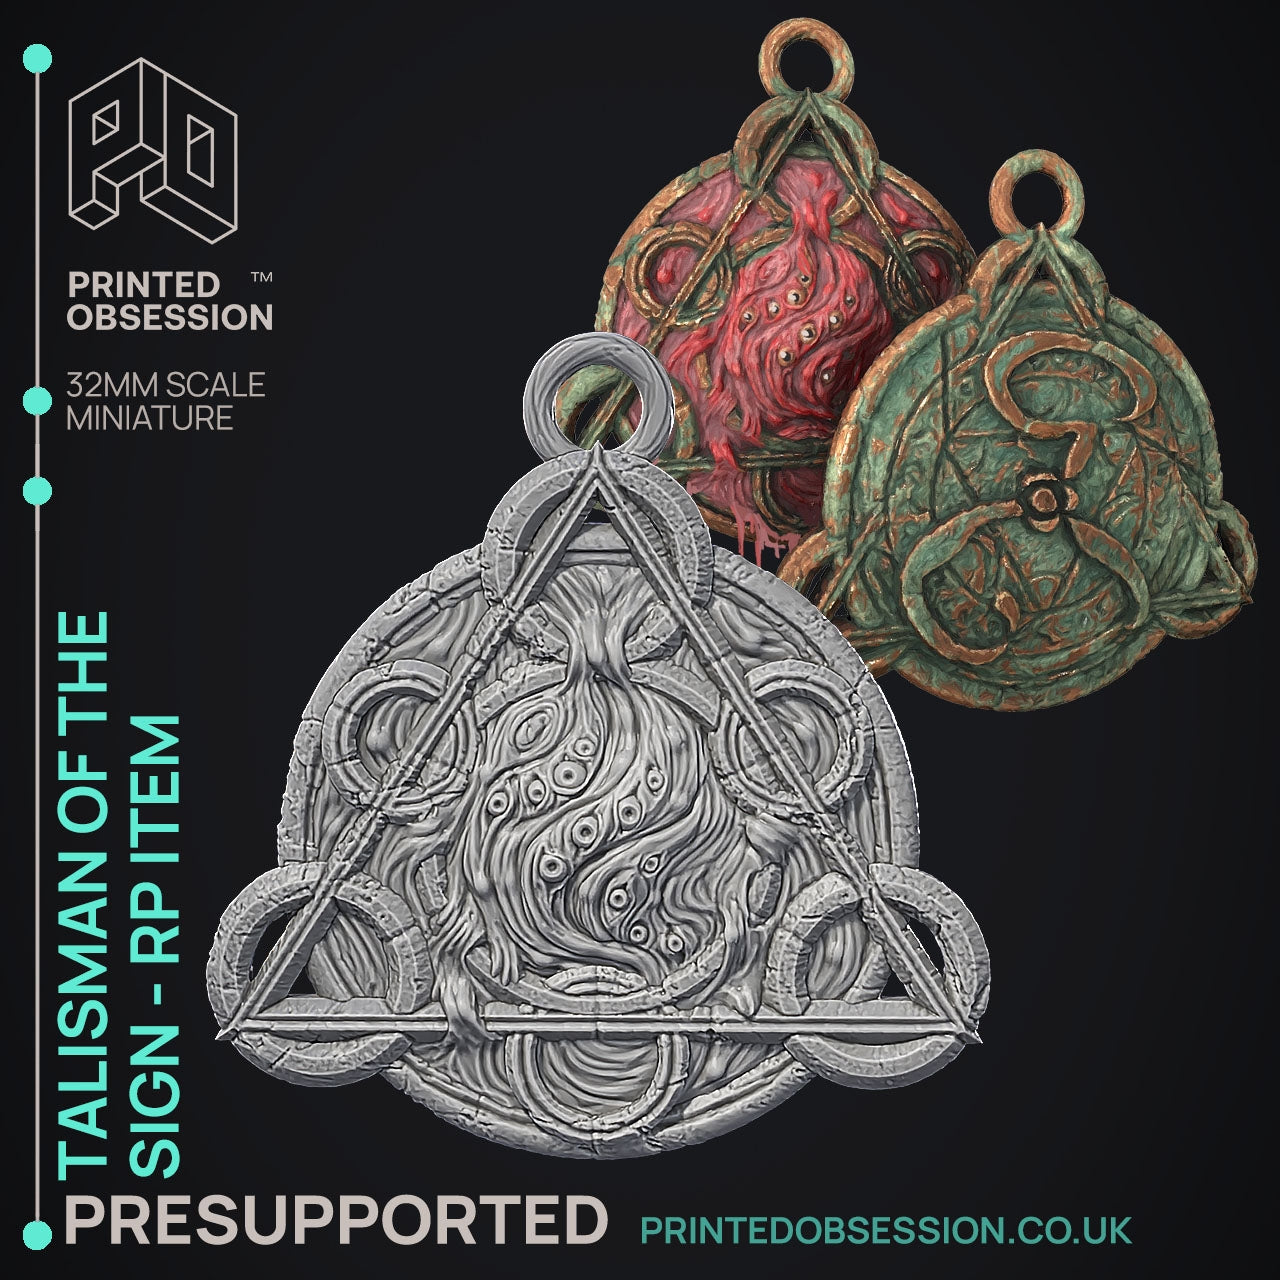 Prop Collection - The Talisman Seller series (role play props and more) The Printed Obsession - Table-top mini, 3D Printed Collectable for painting and playing!